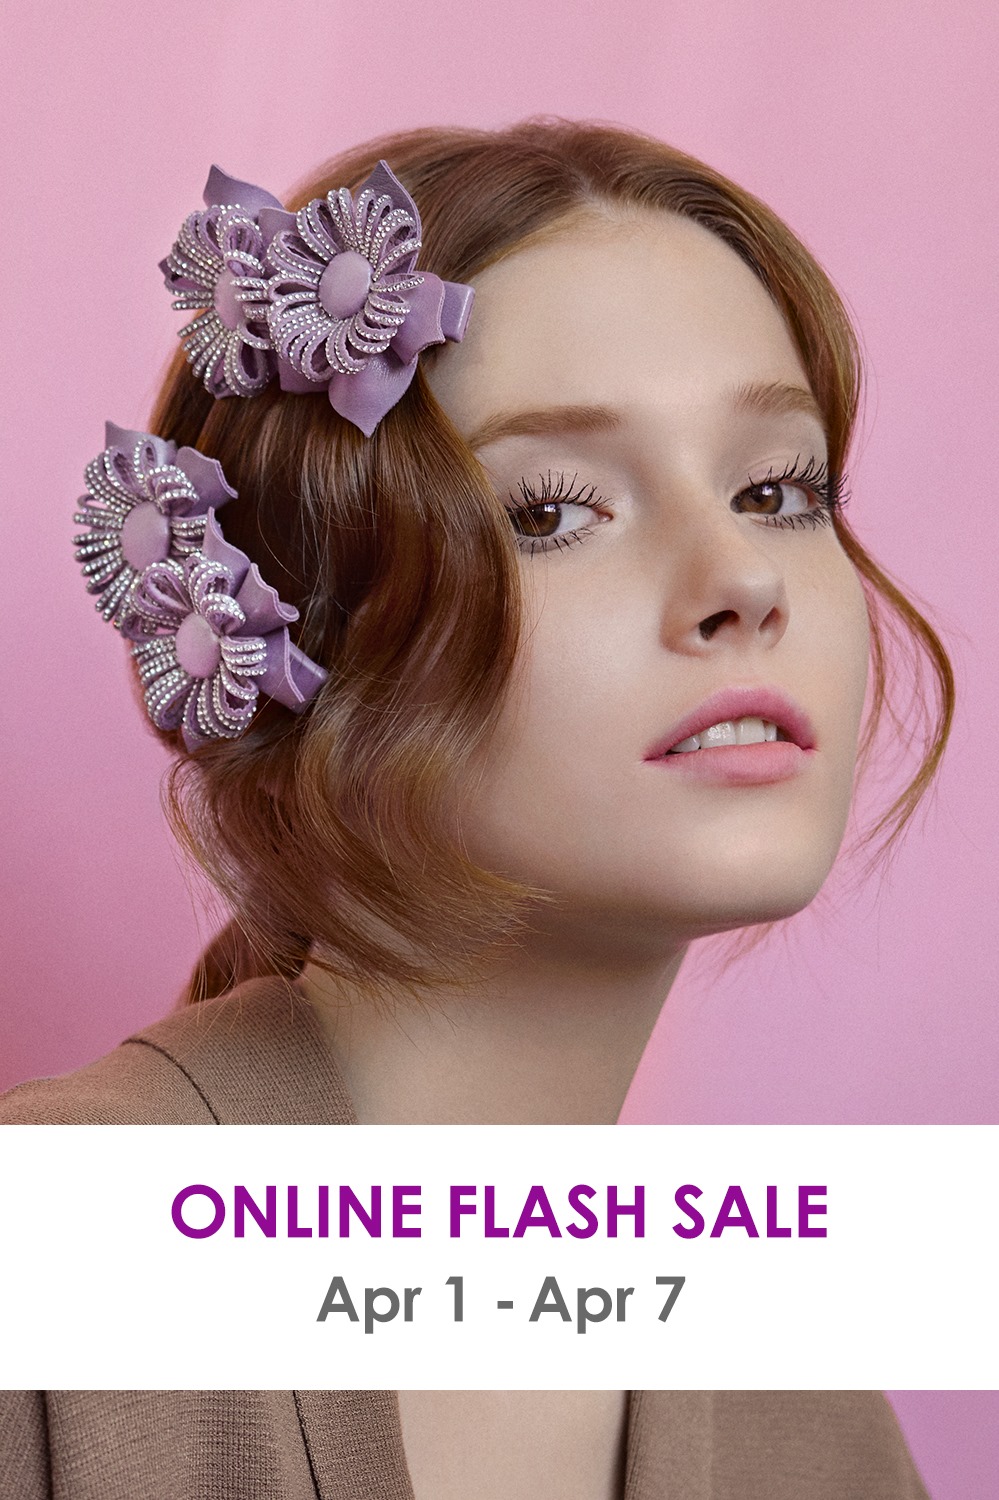 Please be invited to enjoy EASTER FLASH SALE up to 30% OFF at AZ Online Boutique from today until 7 Apr! 1) 20% OFF upon purchase of HK$2,200/US$282 on new arrivals by entering code "EASTER20" before payment